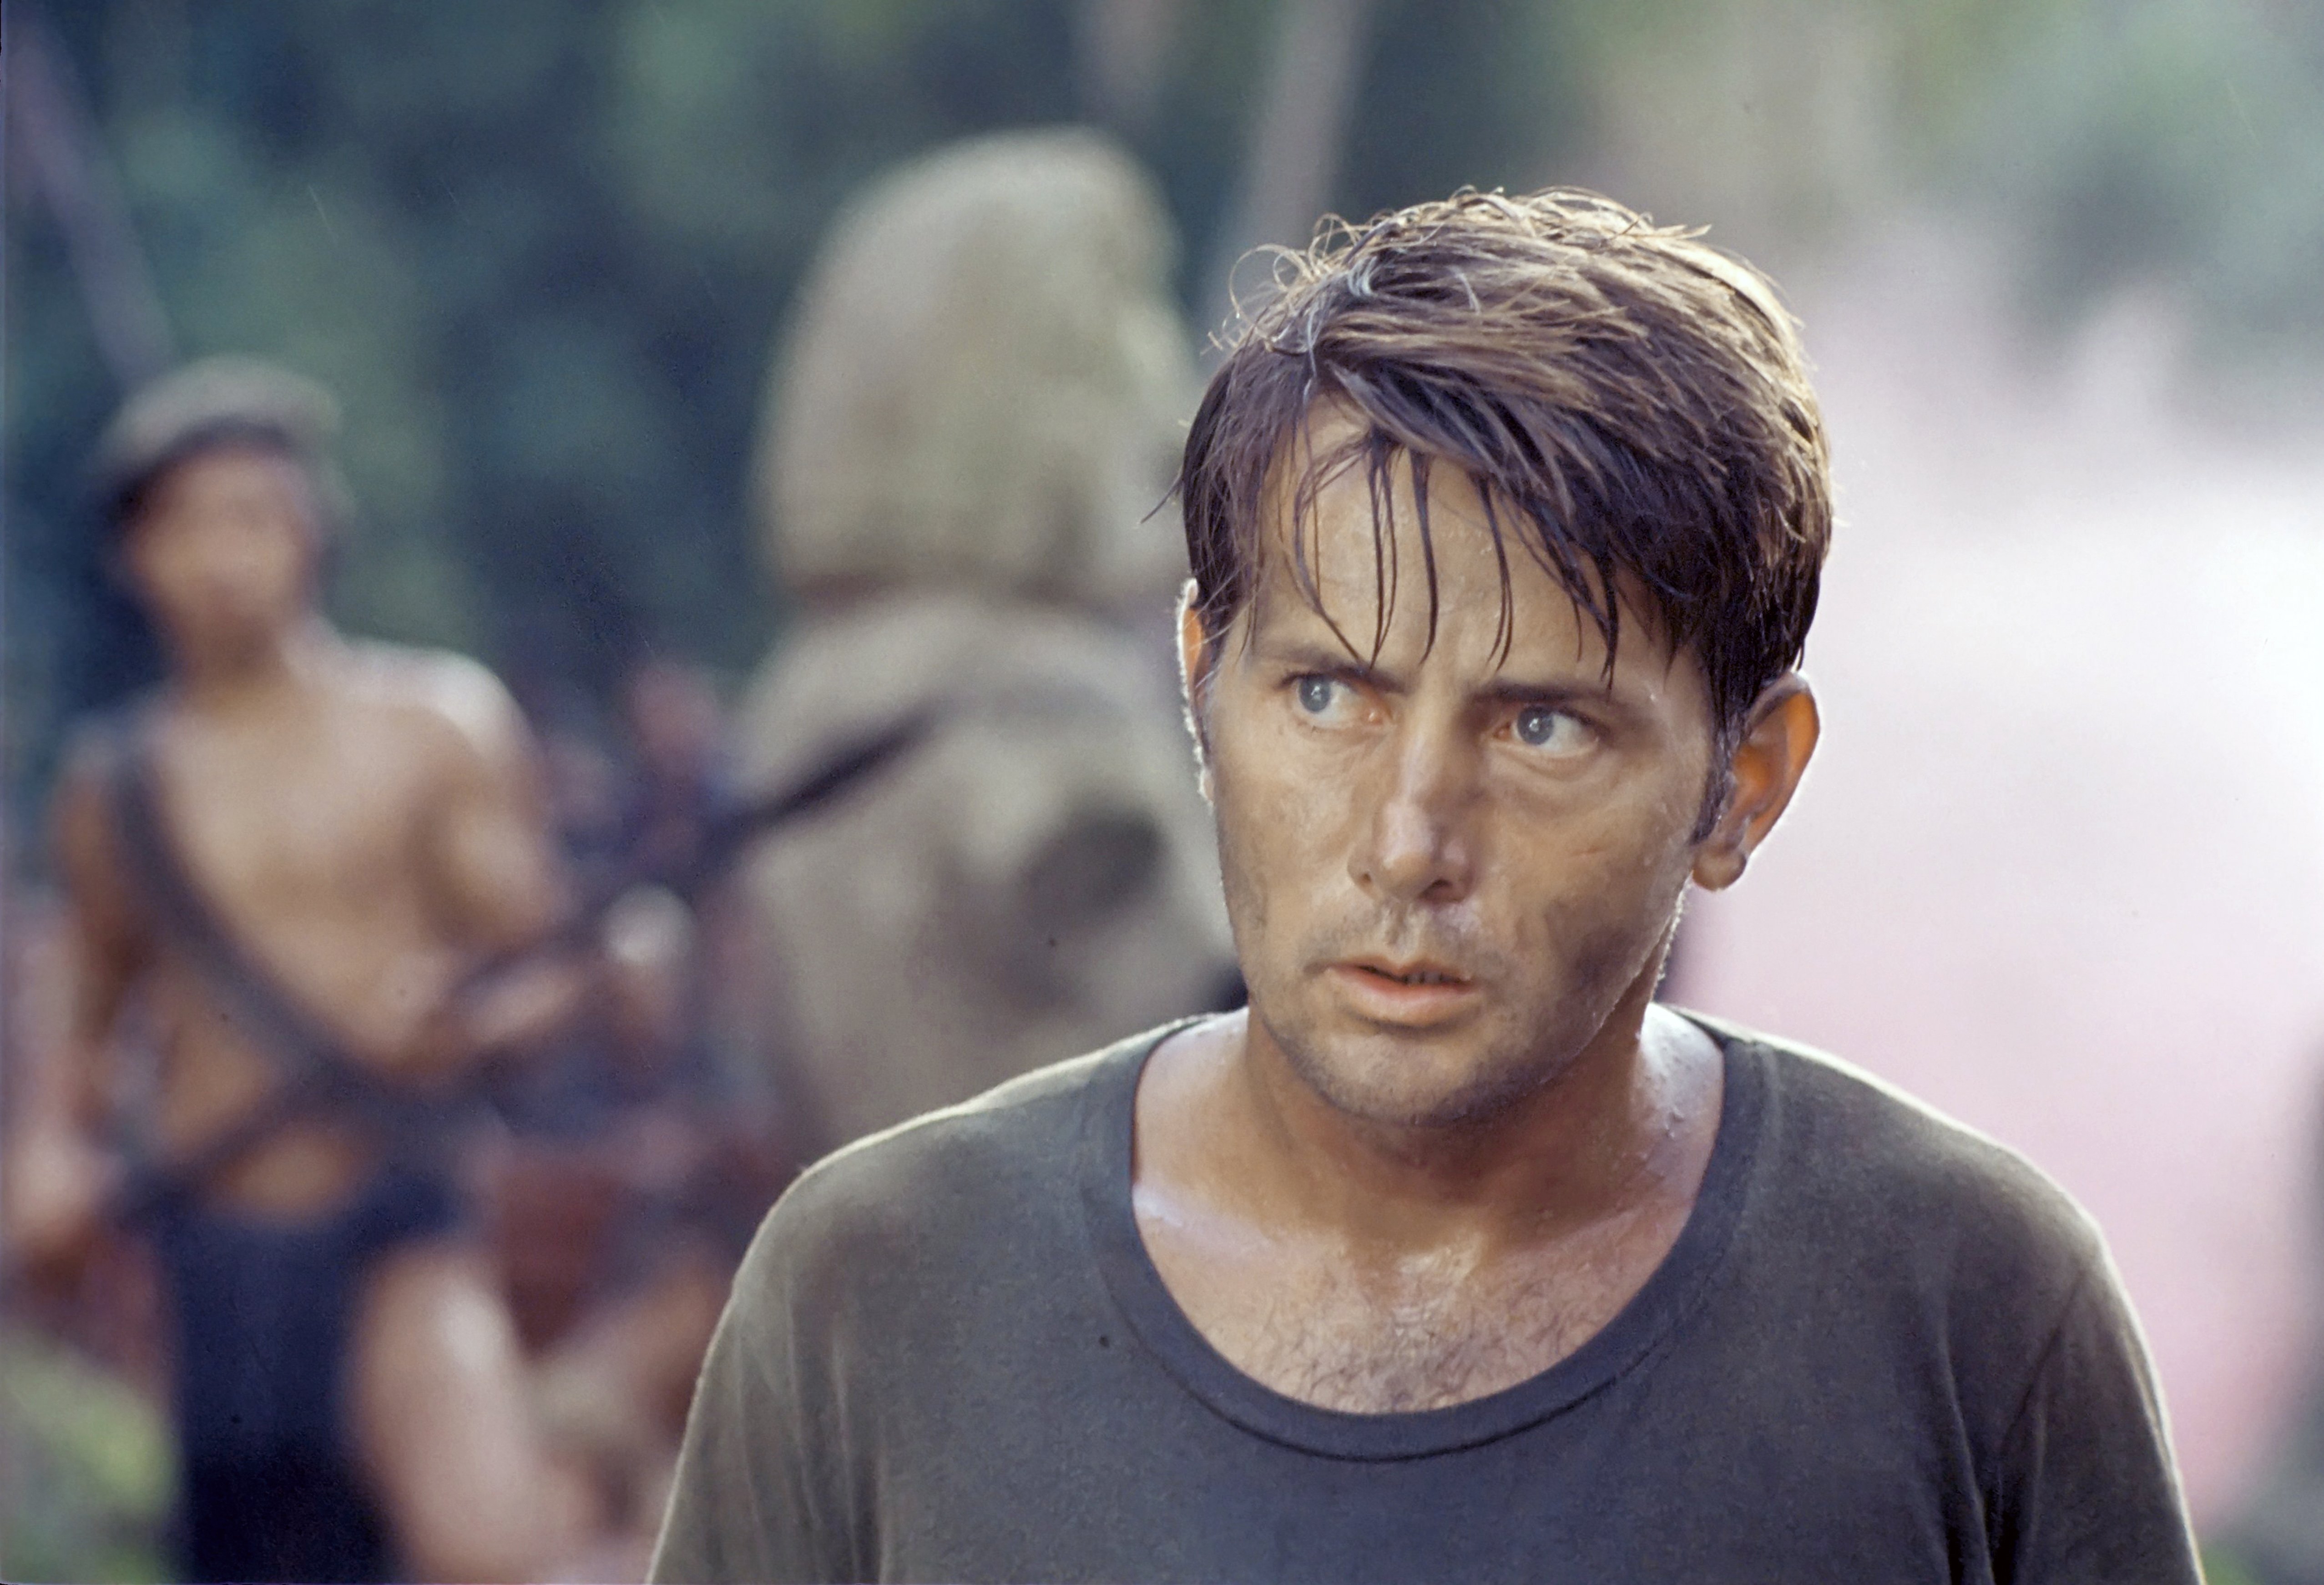 Martin Sheen as Williard on the set of the film "Apocalypse Now," on January 1, 1976.┃Source: Getty Images